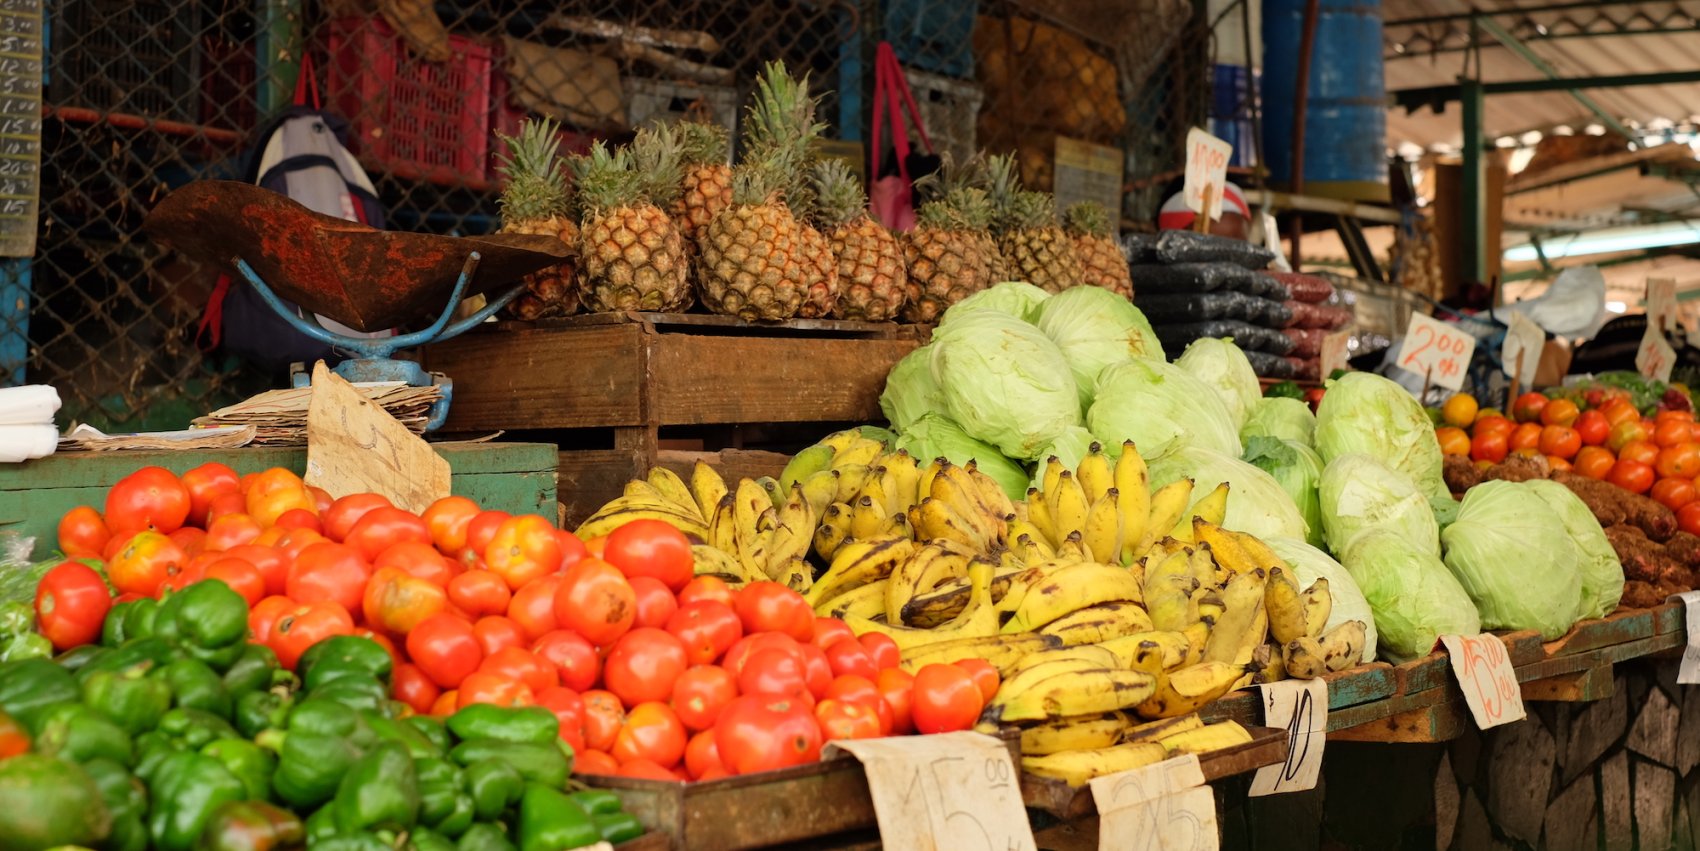 Variety of fruits and vegetables at an outdoor street vendors stand in Cuba